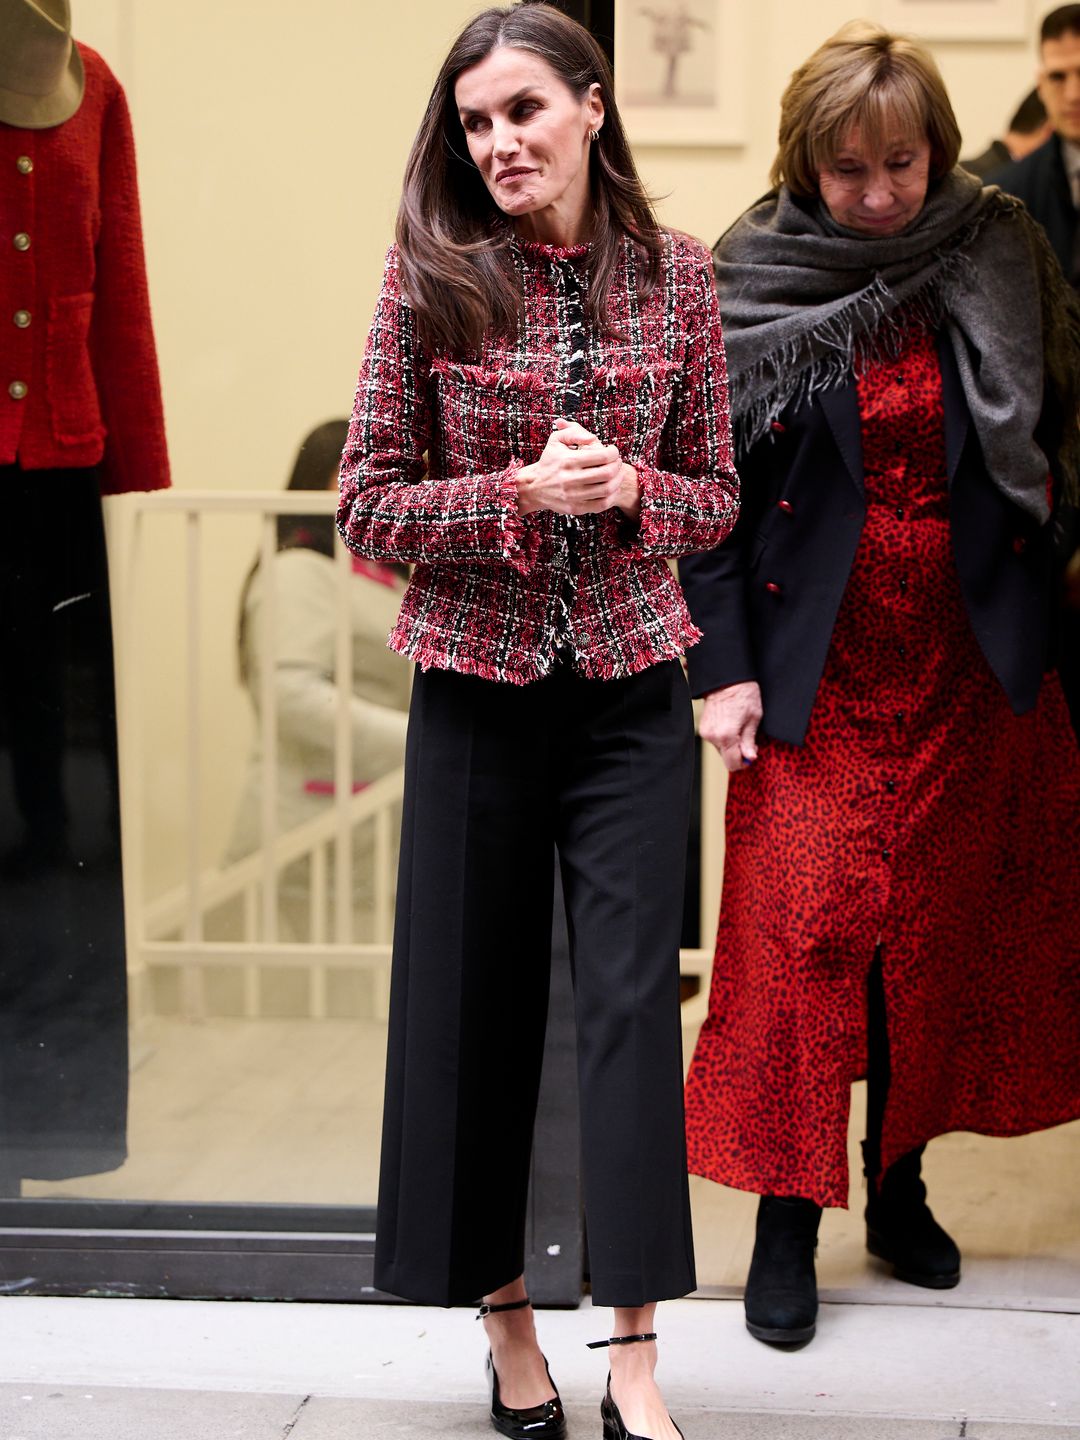 ueen Letizia of Spain visits the central headquarters of the Association for the Prevention, Reintegration in a custom-made jacket with black trousers and ballet flats